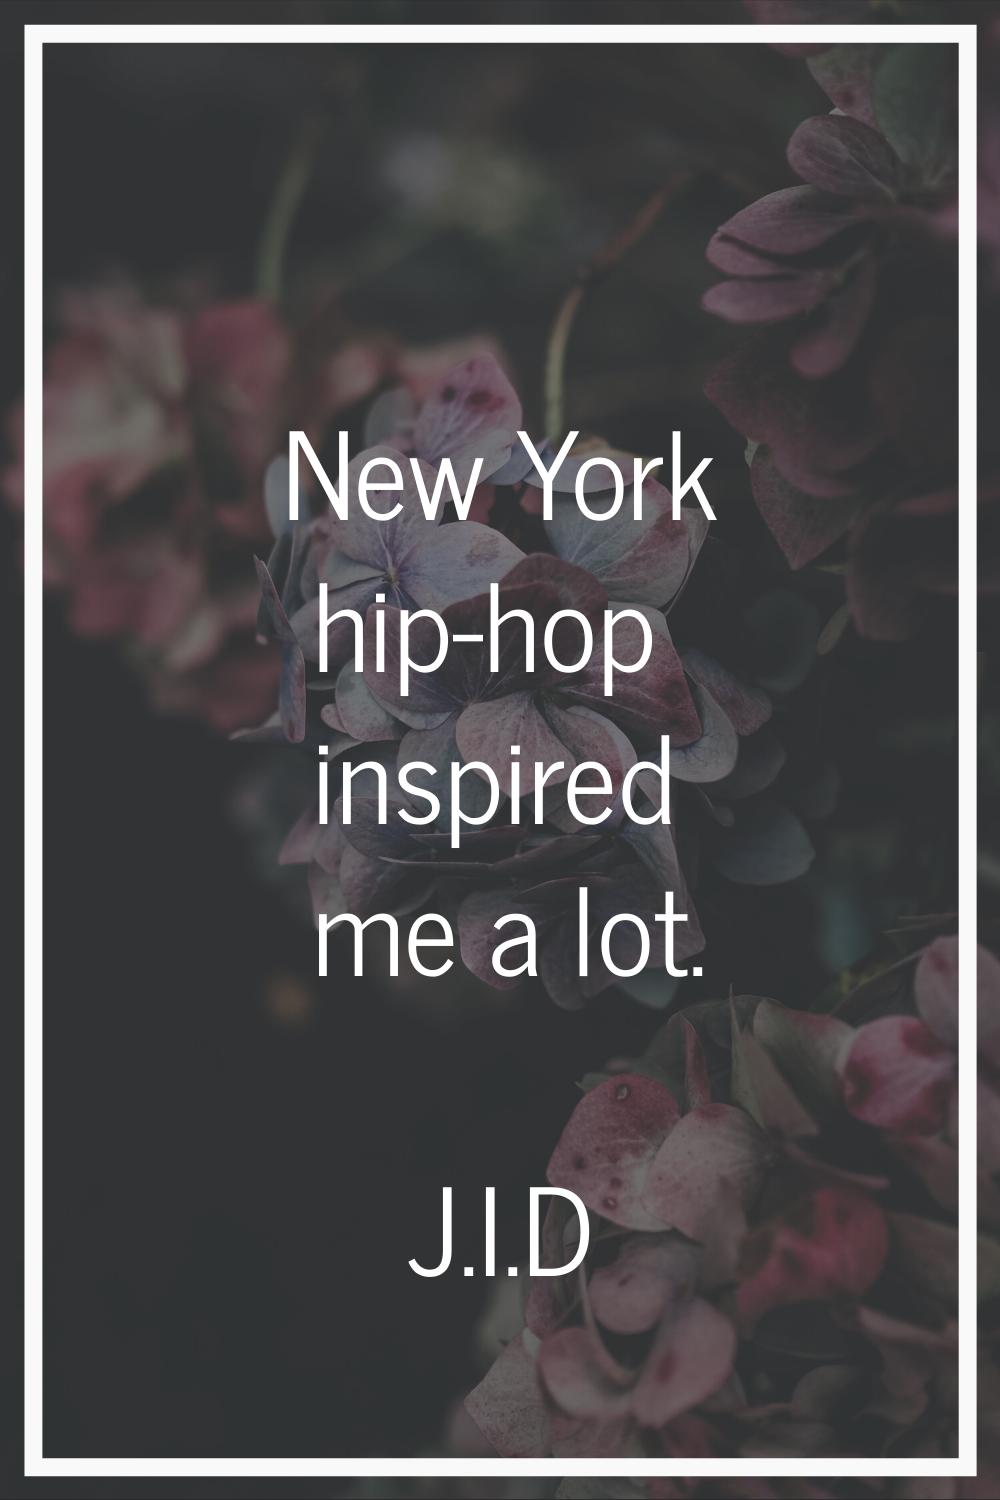 New York hip-hop inspired me a lot.